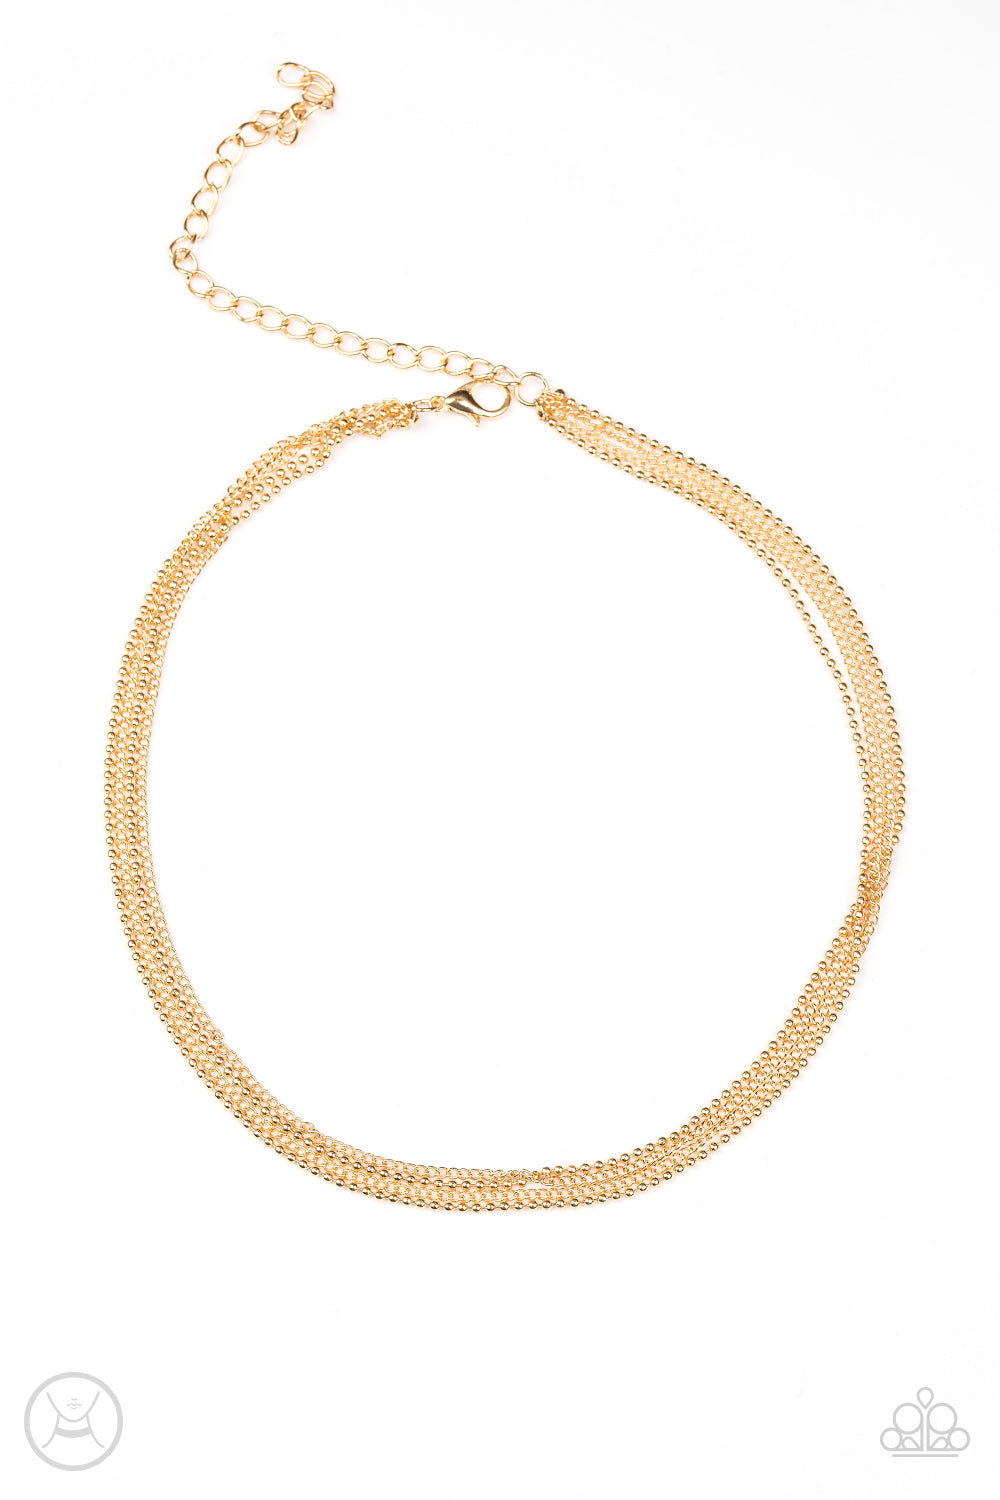 Paparazzi If You Dare Gold Choker Necklace